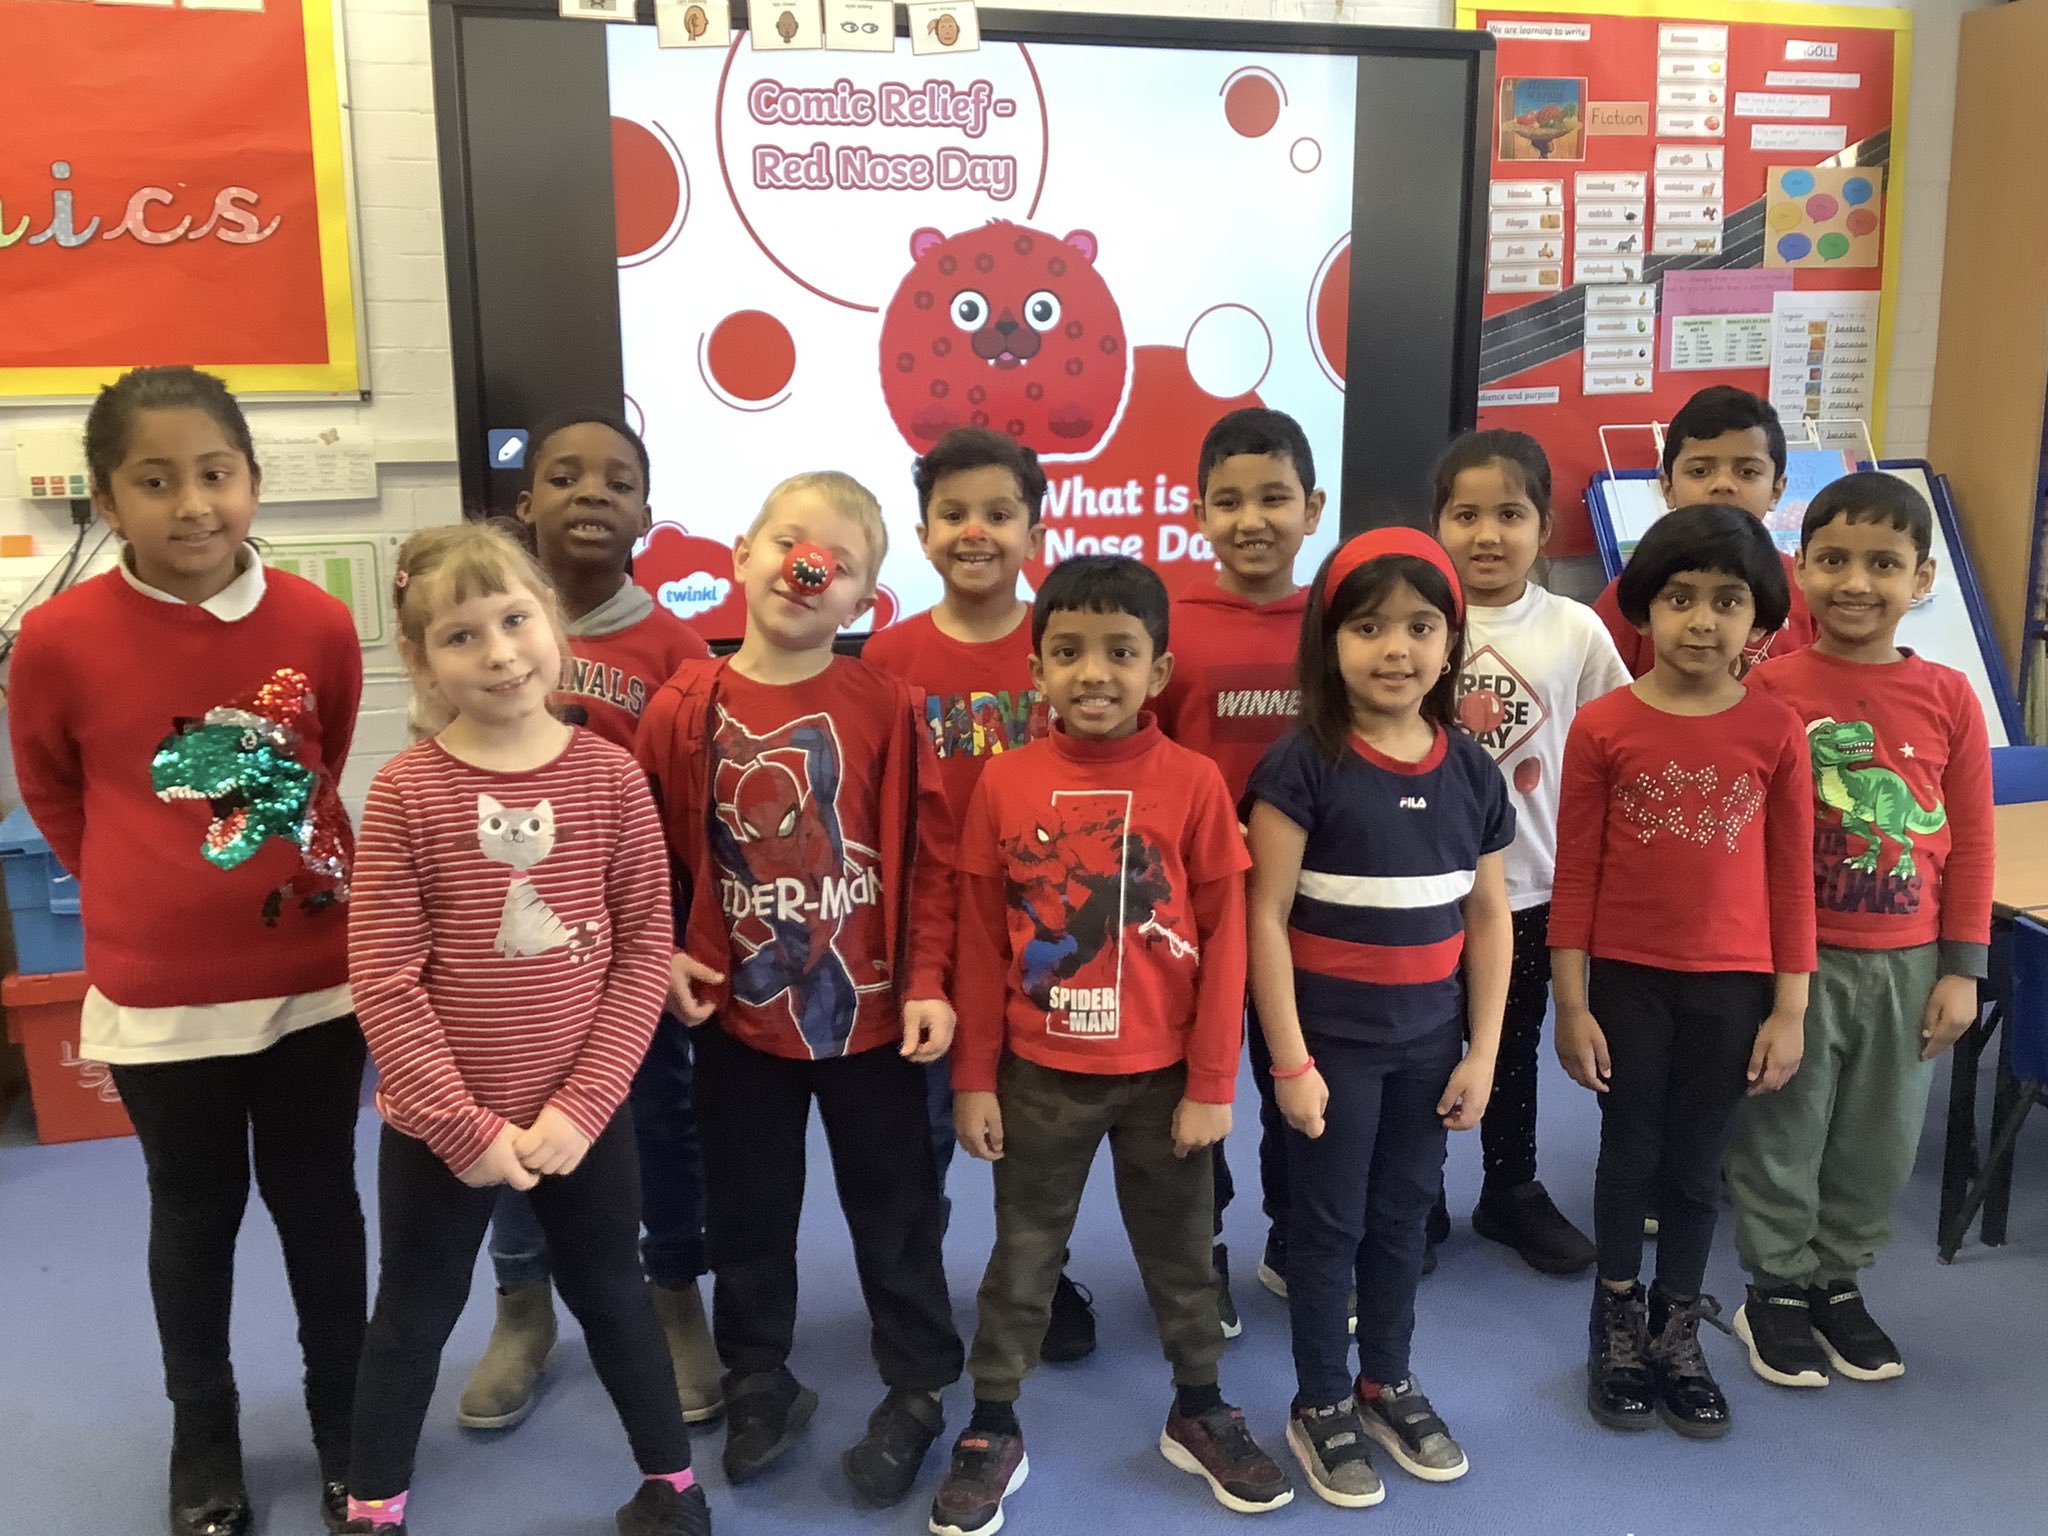 Miss Choudhury on Twitter: "Year 1 Brilliant Butterflies have enjoyed taking part in Red Nose Day! Thank you to parents/carers for kind donations ❤️ #RedNoseDay @HazelSchool @comicrelief https://t.co/e5hZ23Tyii" / Twitter